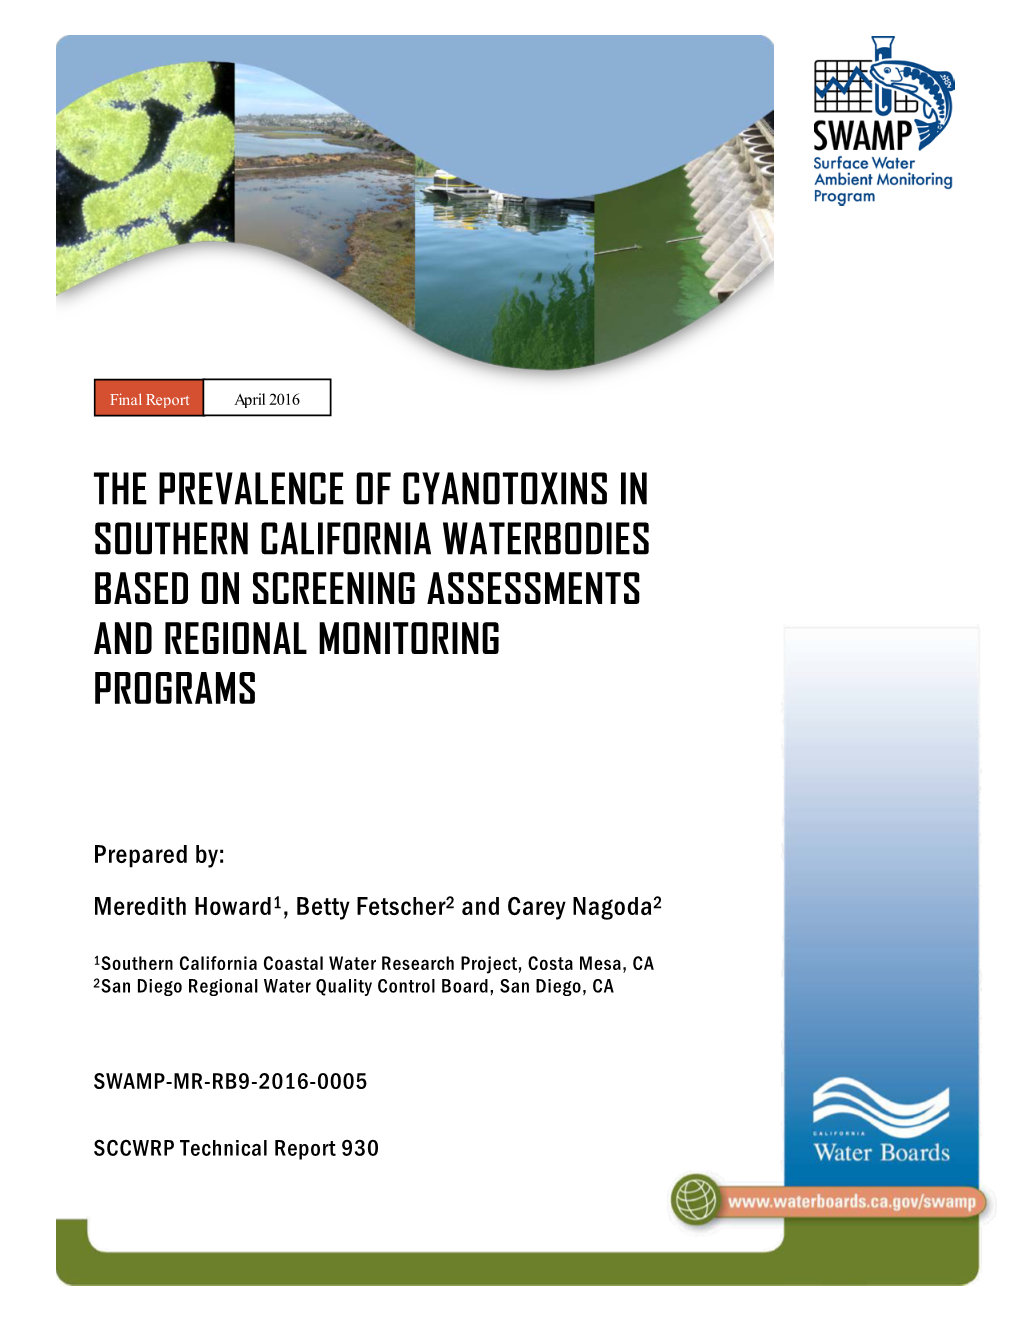 The Prevalence of Cyanotoxins in Southern